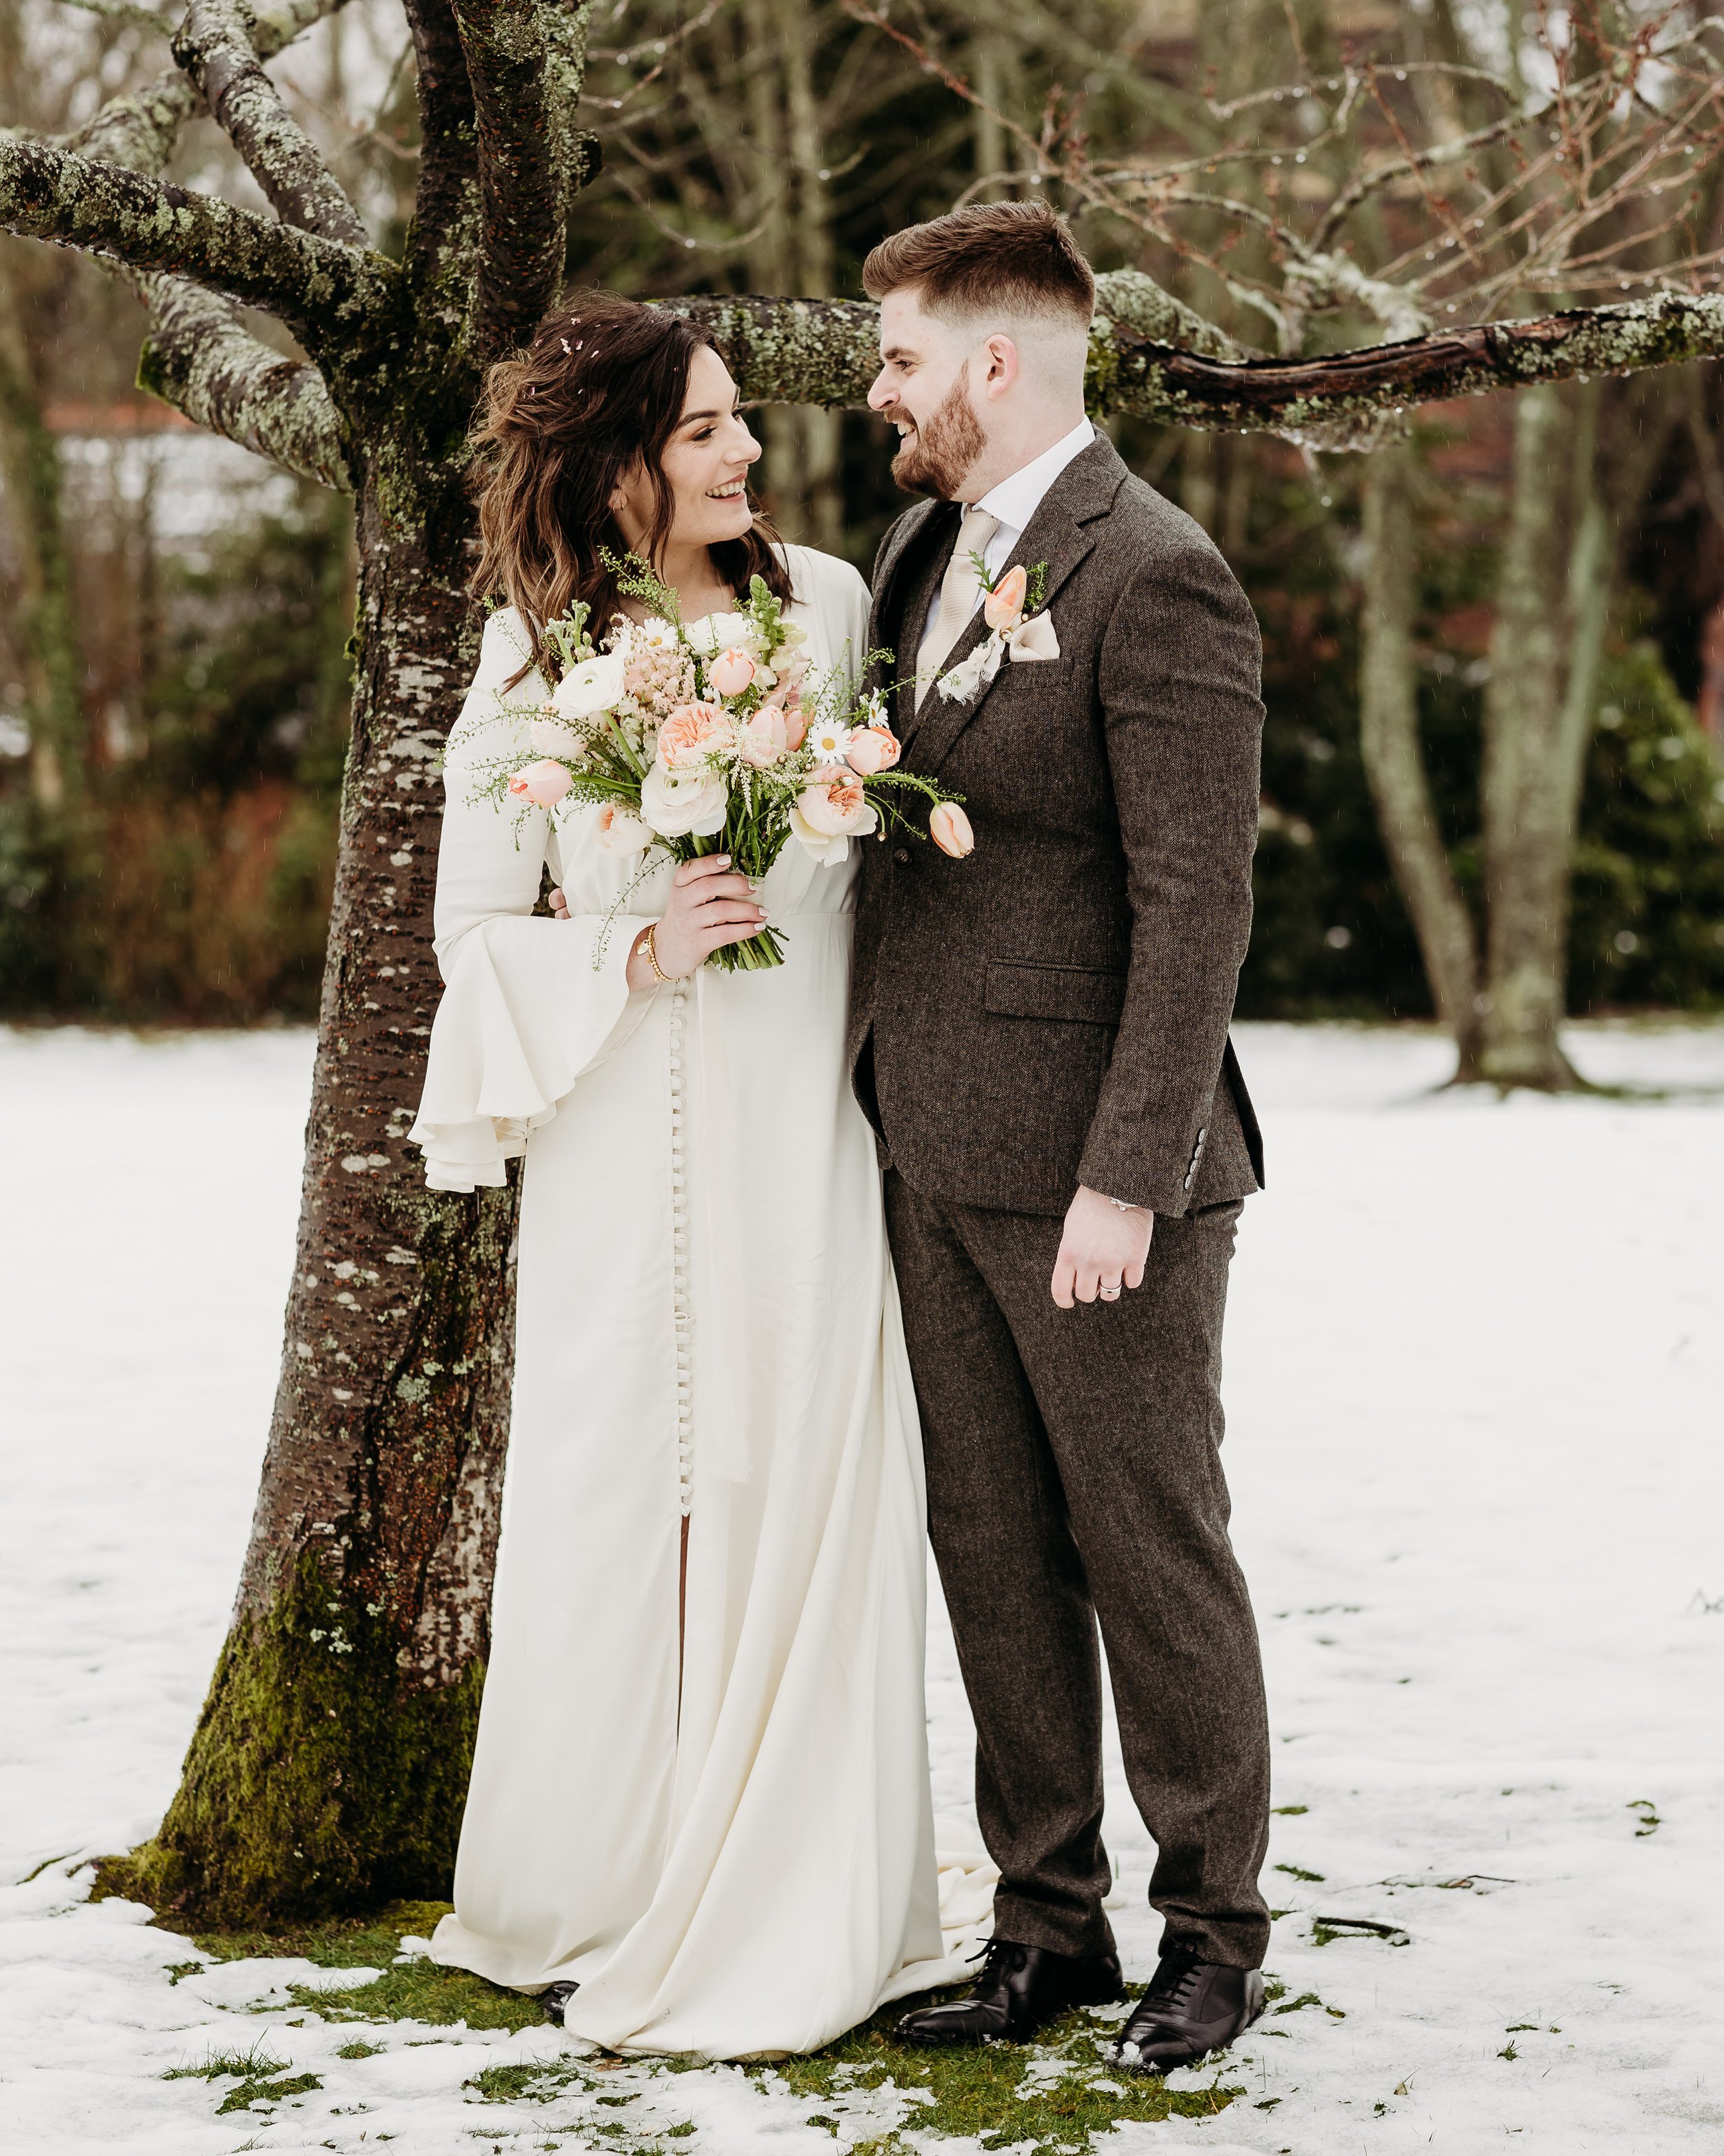  The bride and groom stood on snowy grass next to a tree trunk looking into each others eyes. The wild, hand tied bridal bouquet is both romantic and striking in its softness.    Photo by: When Charlie Met Hannah Photography 